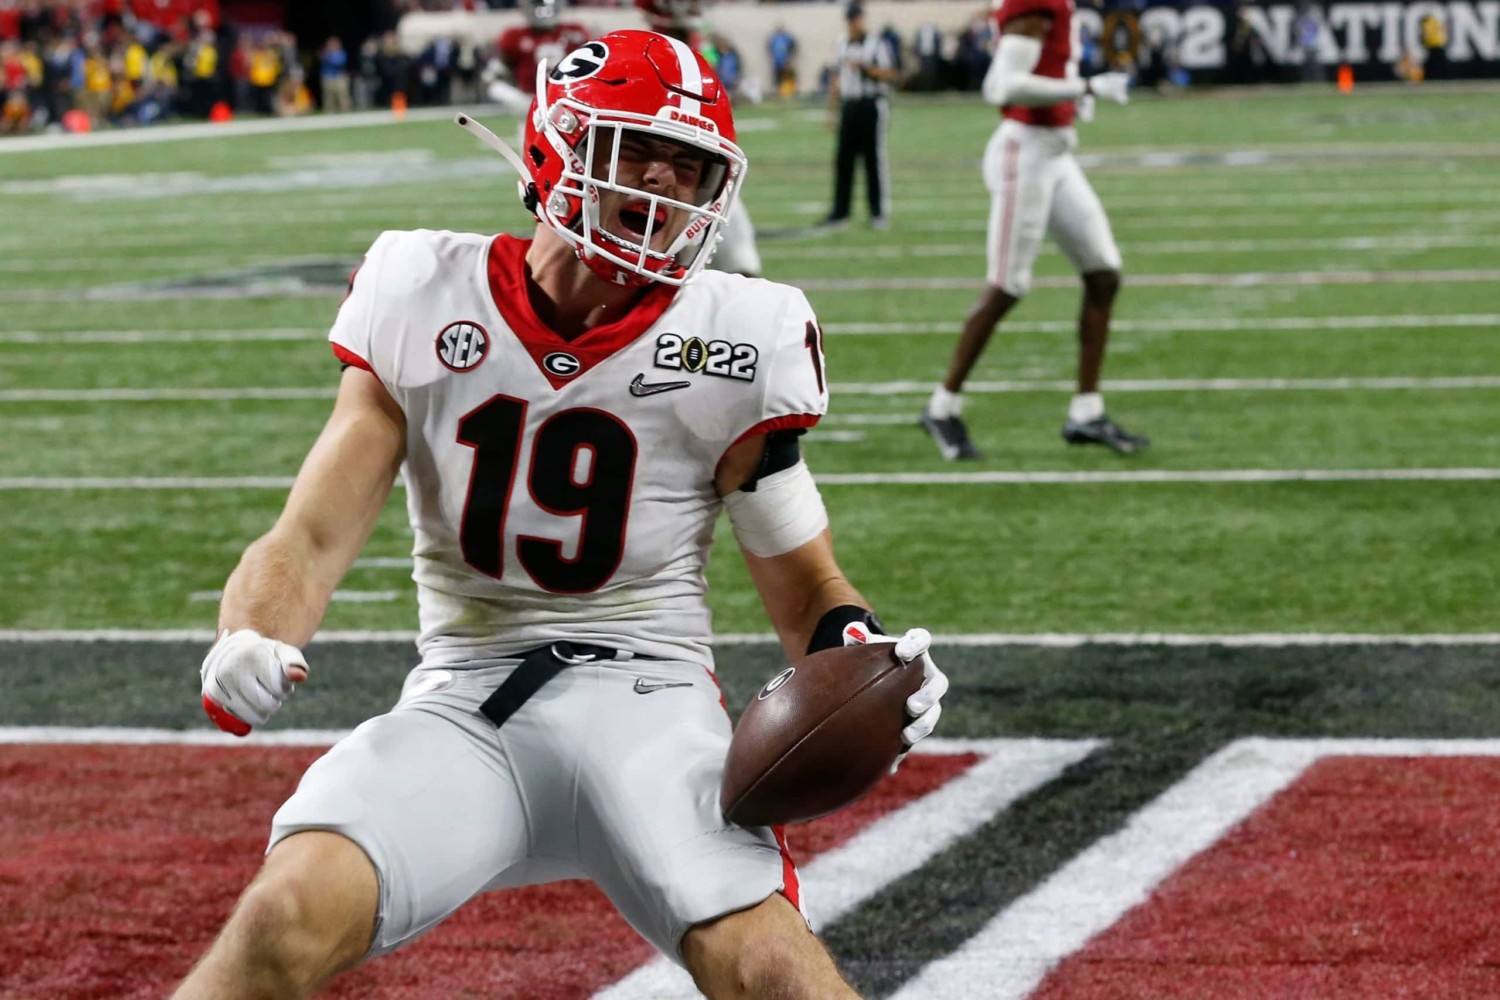 Georgia tight end Brock Bowers celebrates after scoring touchdown in 2022 National Championship game against Alabama